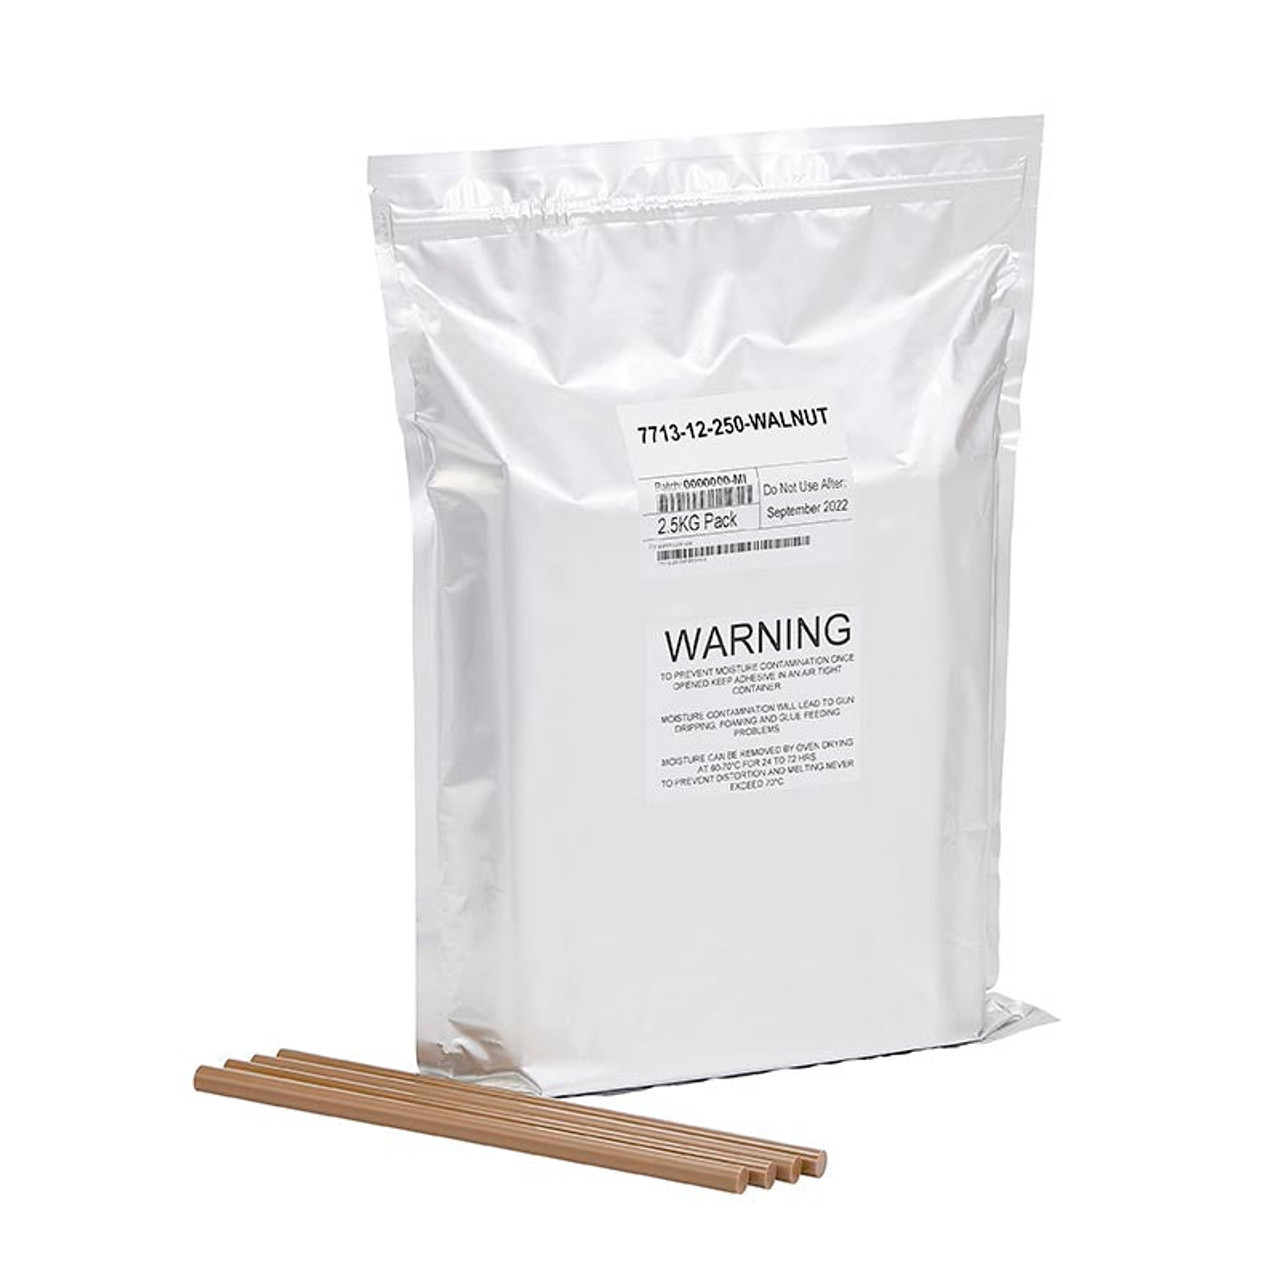 KNOTTEC Adhesives  Wood Repair with  for KNOTTEC Adhesives | Wood Repair Walnut Therm Melt Adhesives  in Pack of 5 sticks that have Therm Melt  available in Australia and New Zealand